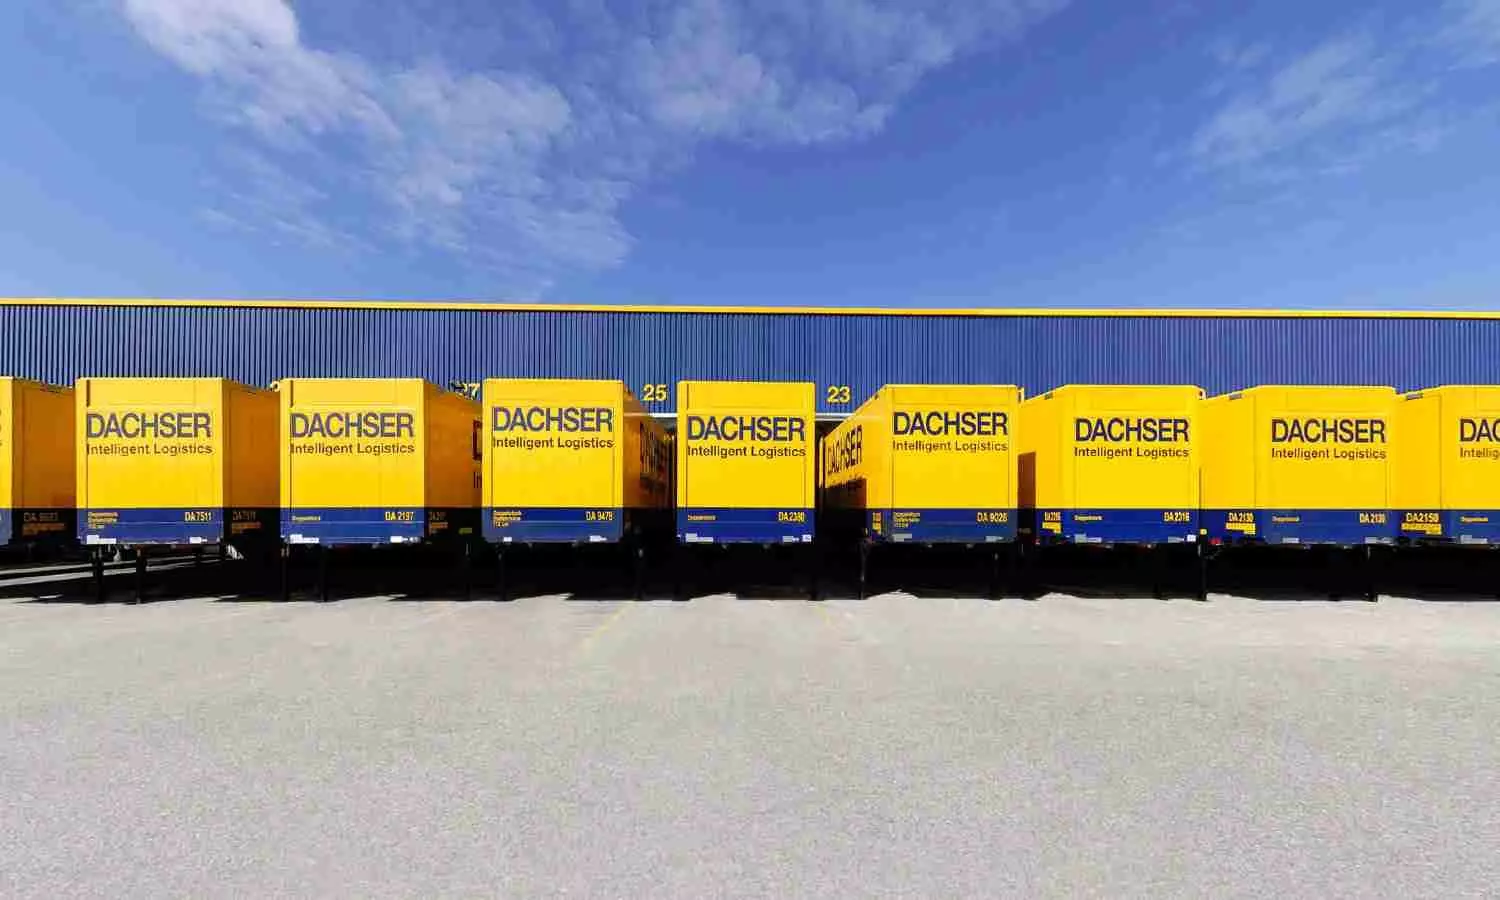 Dachser sees another leap in growth